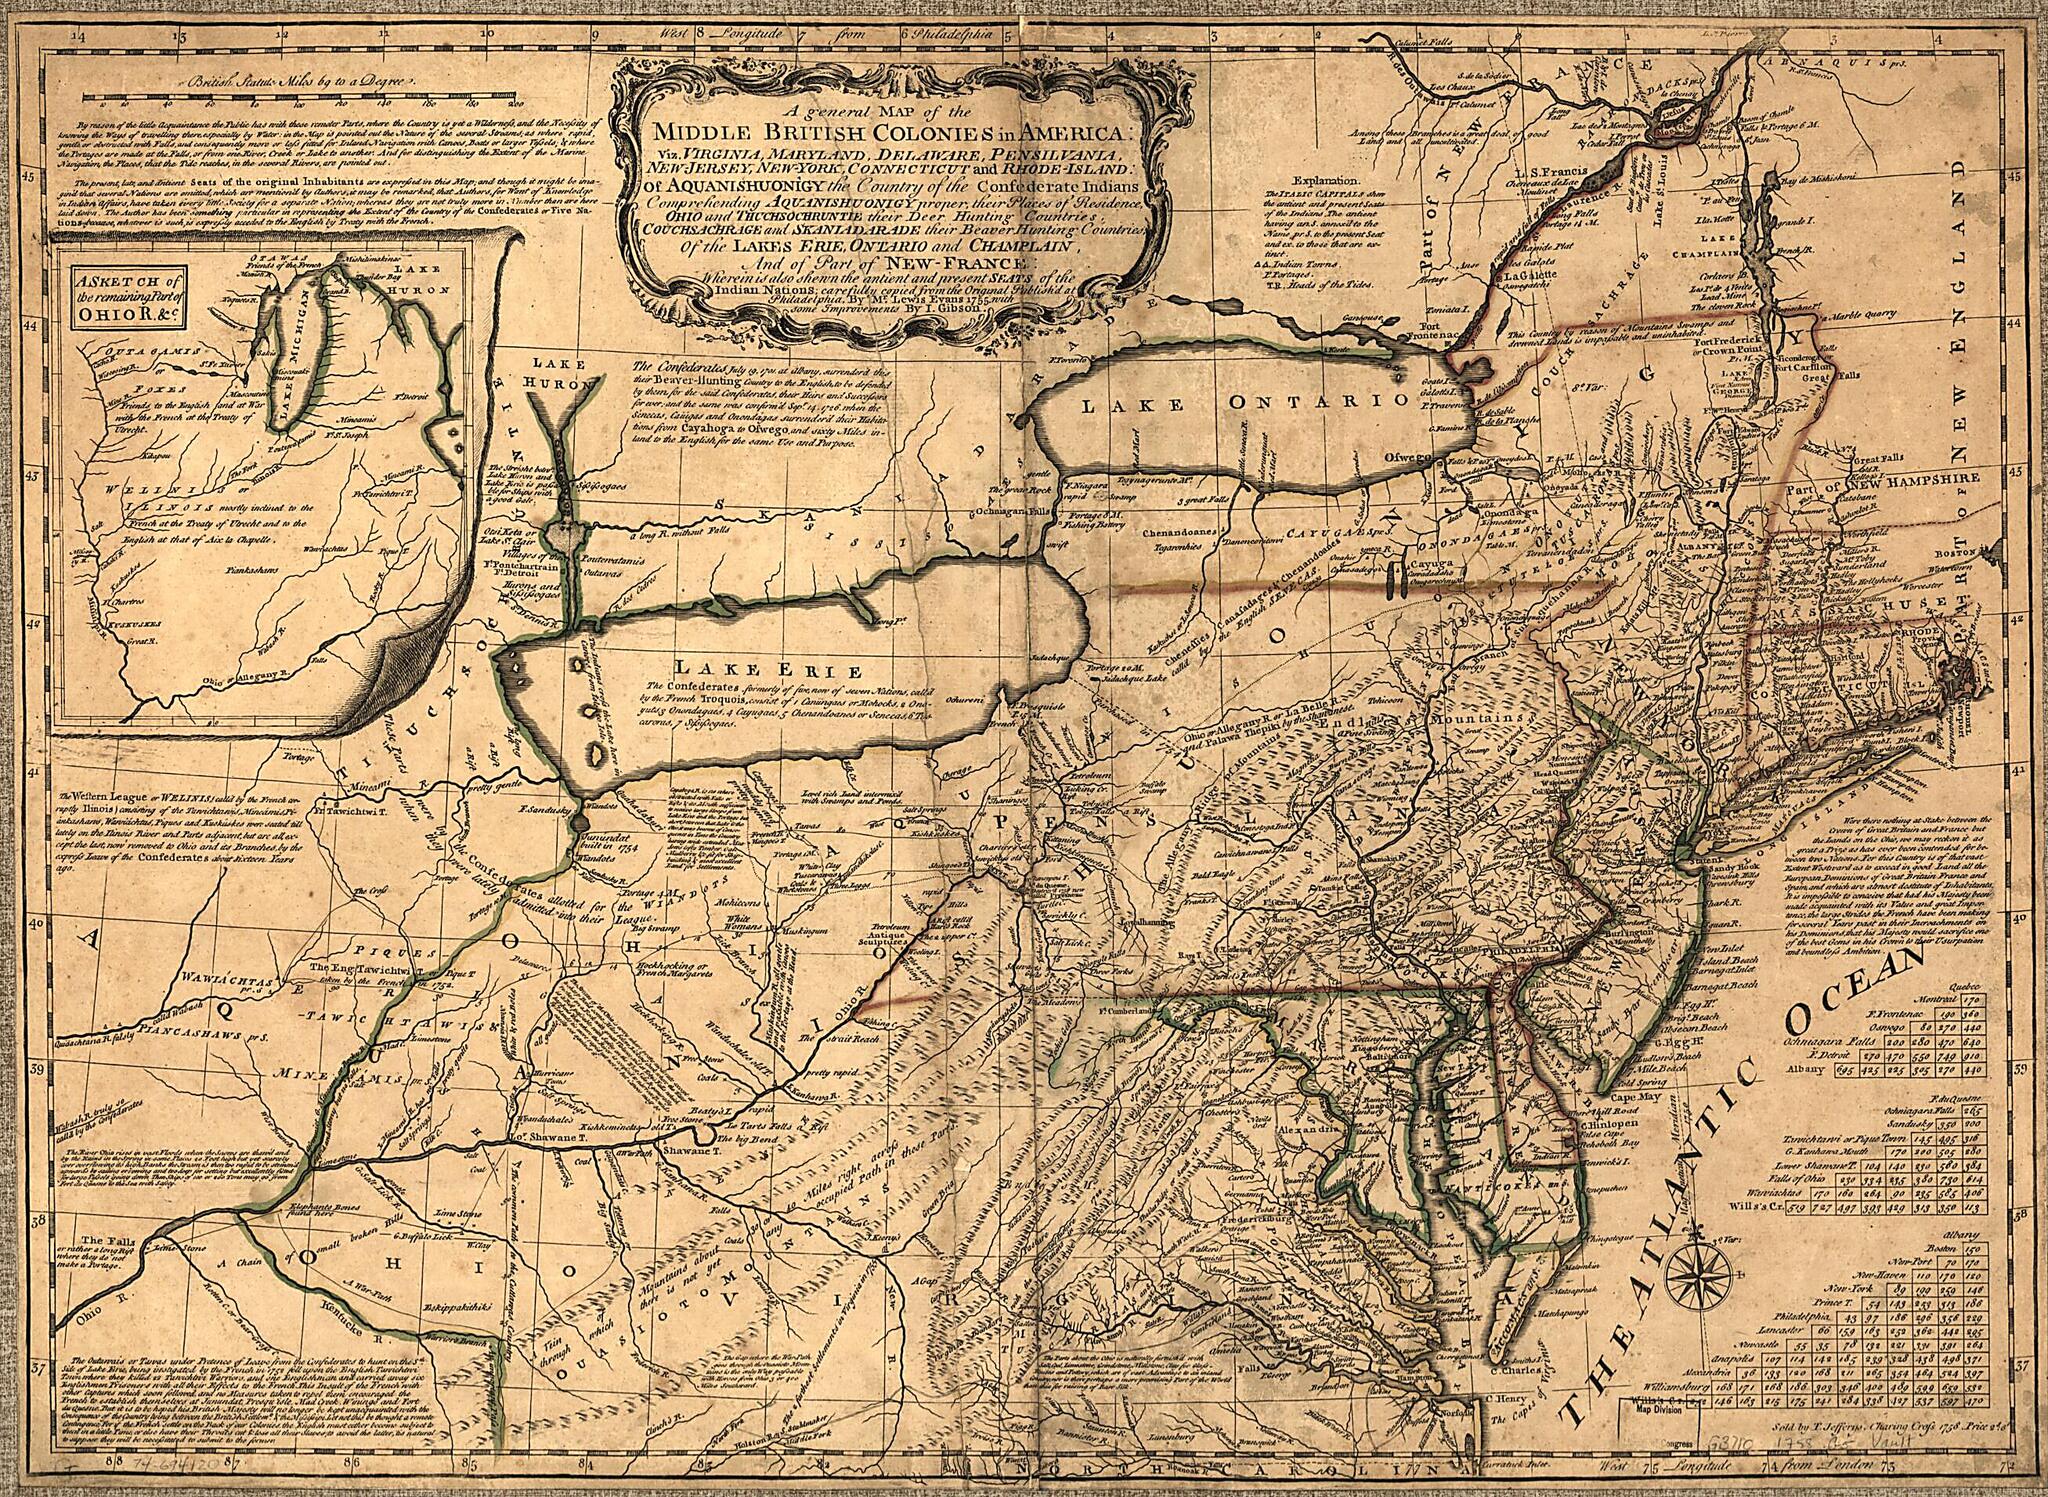 This old map of Jersey, New-York, Connecticut and Rhode-Island: of Aquanishuonigy the Country of the Confederate Indians Comprehending Aquanishuonigy Proper, Their Places of Residence, Ohio and Thuchsochruntie Their Deer Hunting Countries, Couchsachrage 